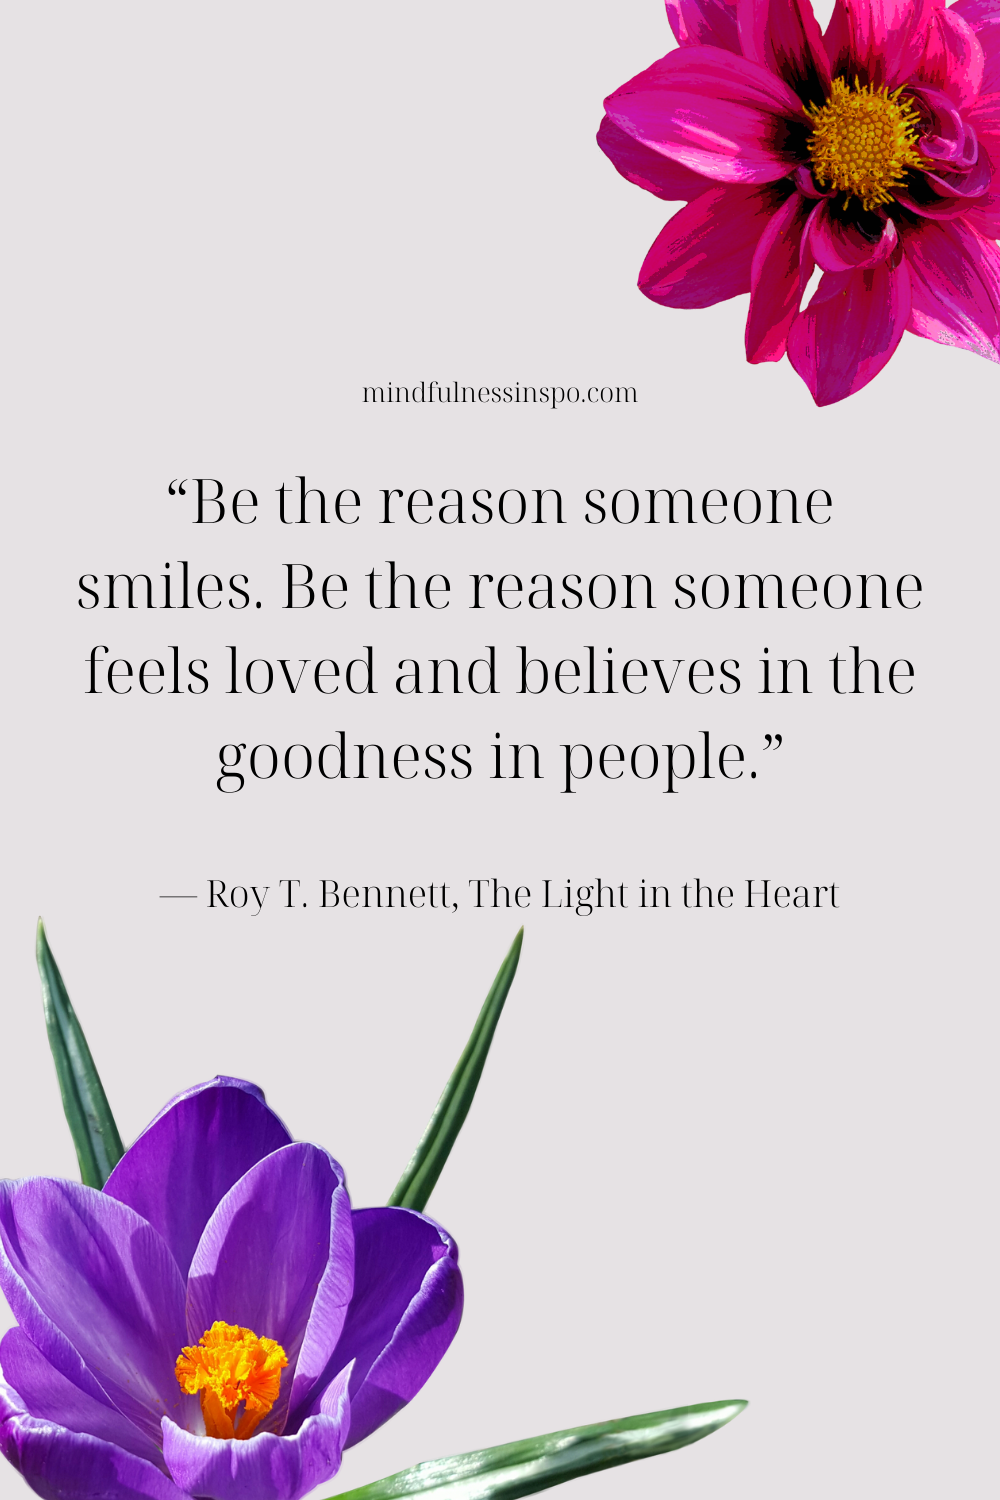 love quotes: “Be the reason someone smiles. Be the reason someone feels loved and believes in the goodness in people.” from blogpost 24 beautiful quotes about love